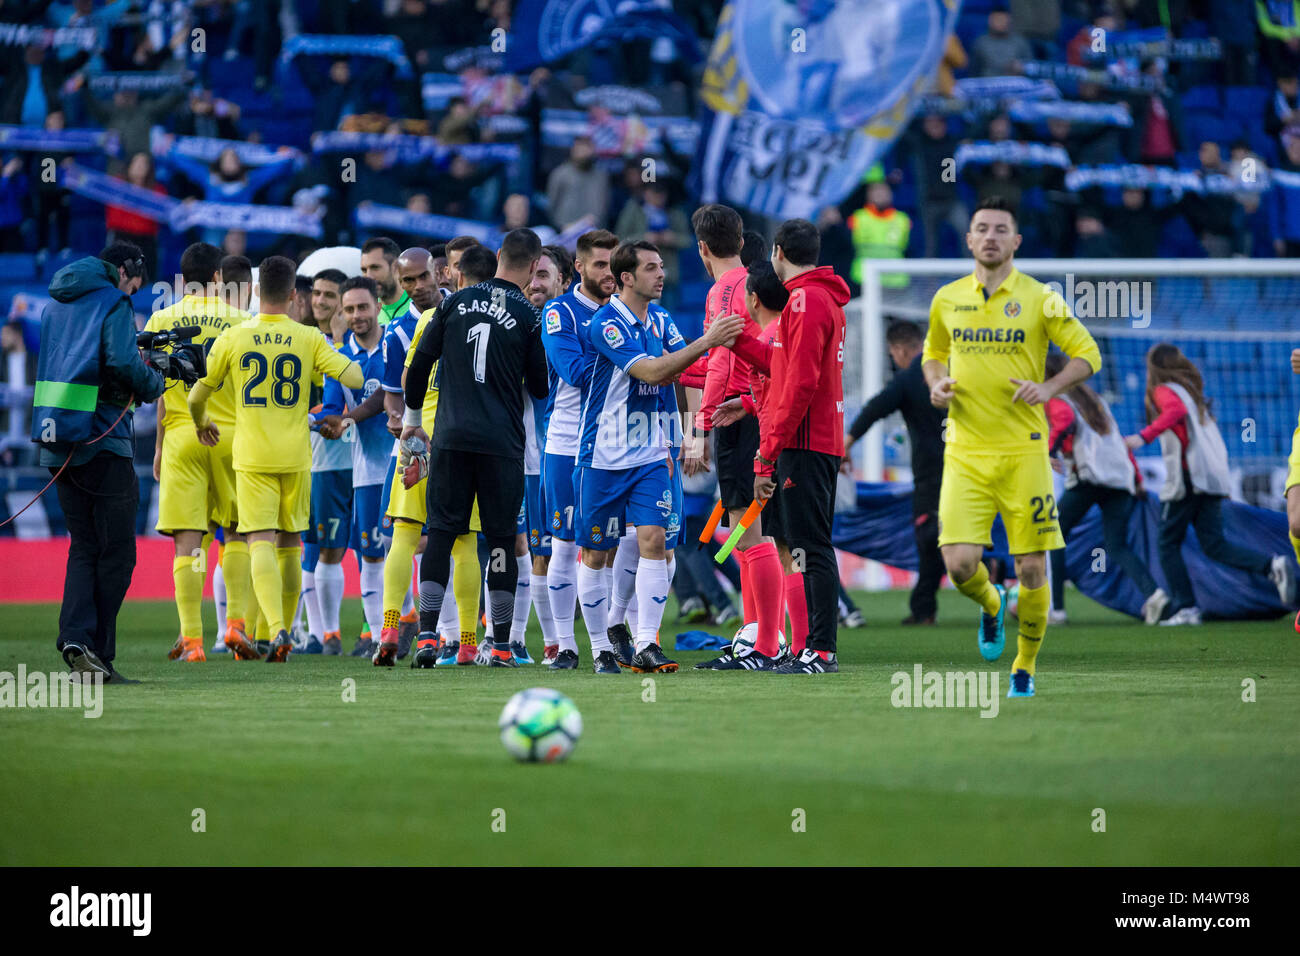 Barcelona, Spain. 18th Feb, 2018. RCD Espanyol and Villarreal players before the match between RCD Espanyol and Villarreal, for the round 24 of the Liga Santander, played at RCDE Stadium on 18th February 2018 in Barcelona, Spain. Credit: Gtres Información más Comuniación on line, S.L./Alamy Live News Stock Photo